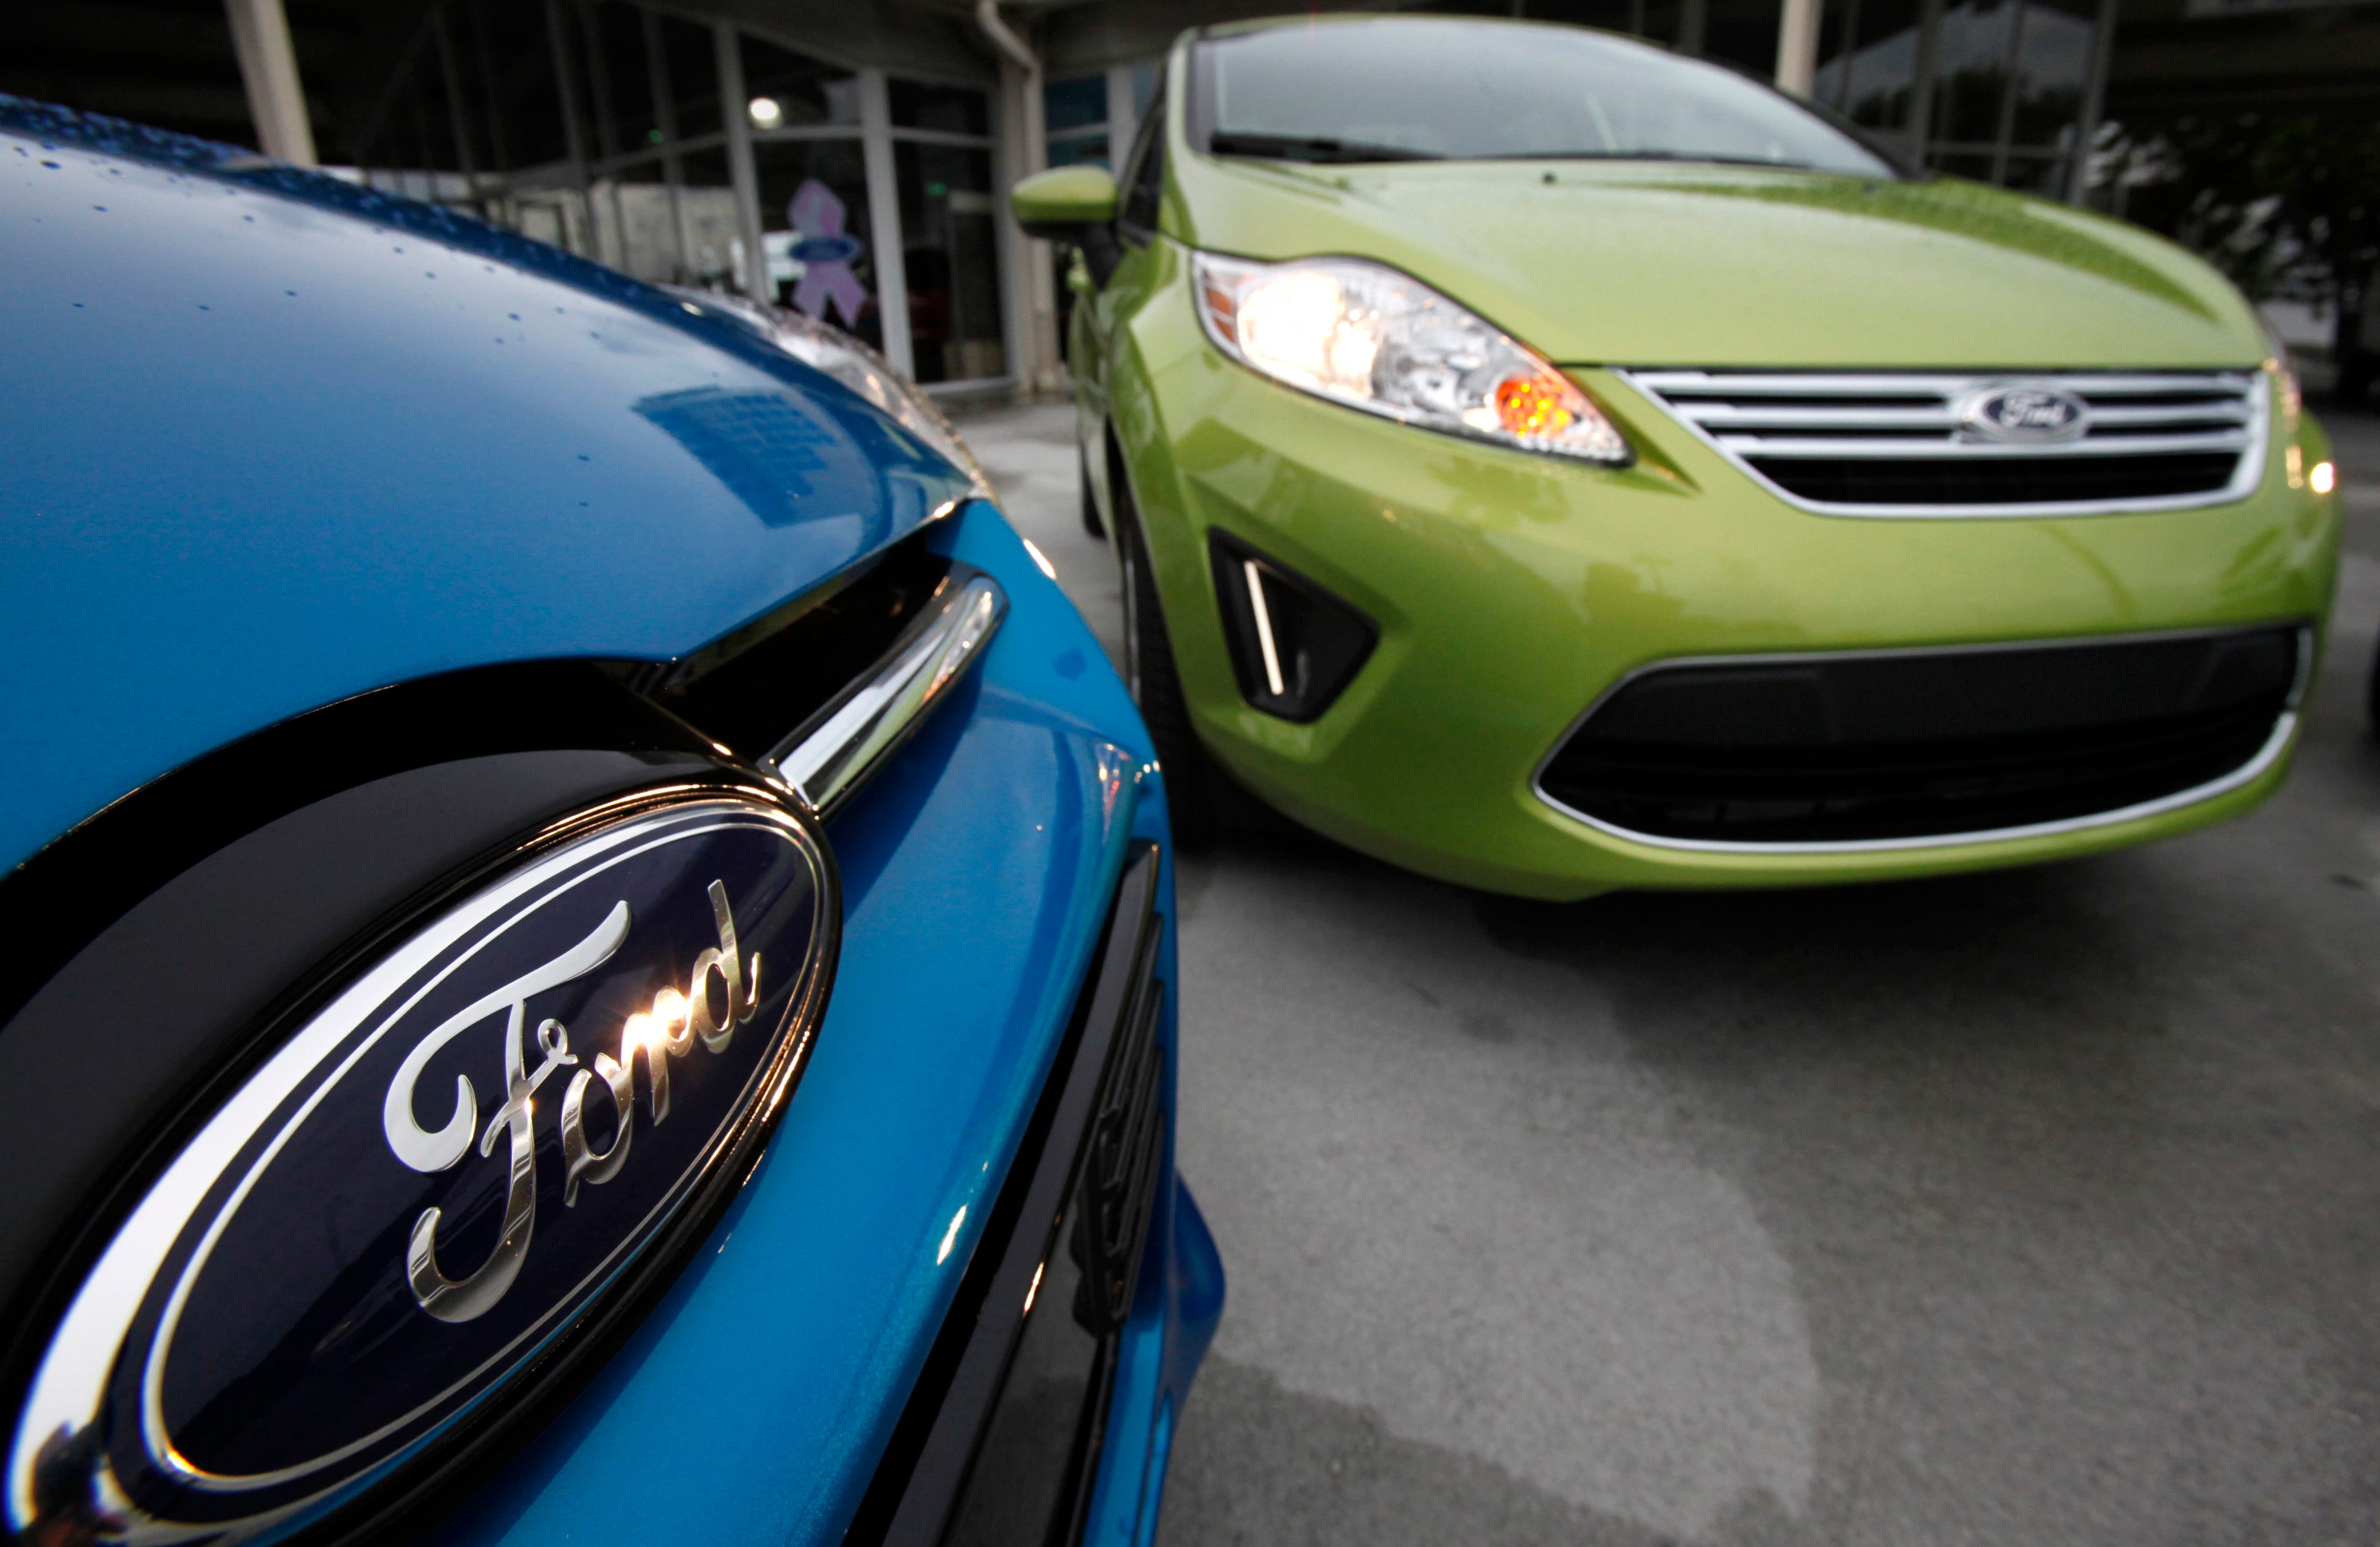 Ford knew Focus, Fiesta had flawed transmission, sold them anyway